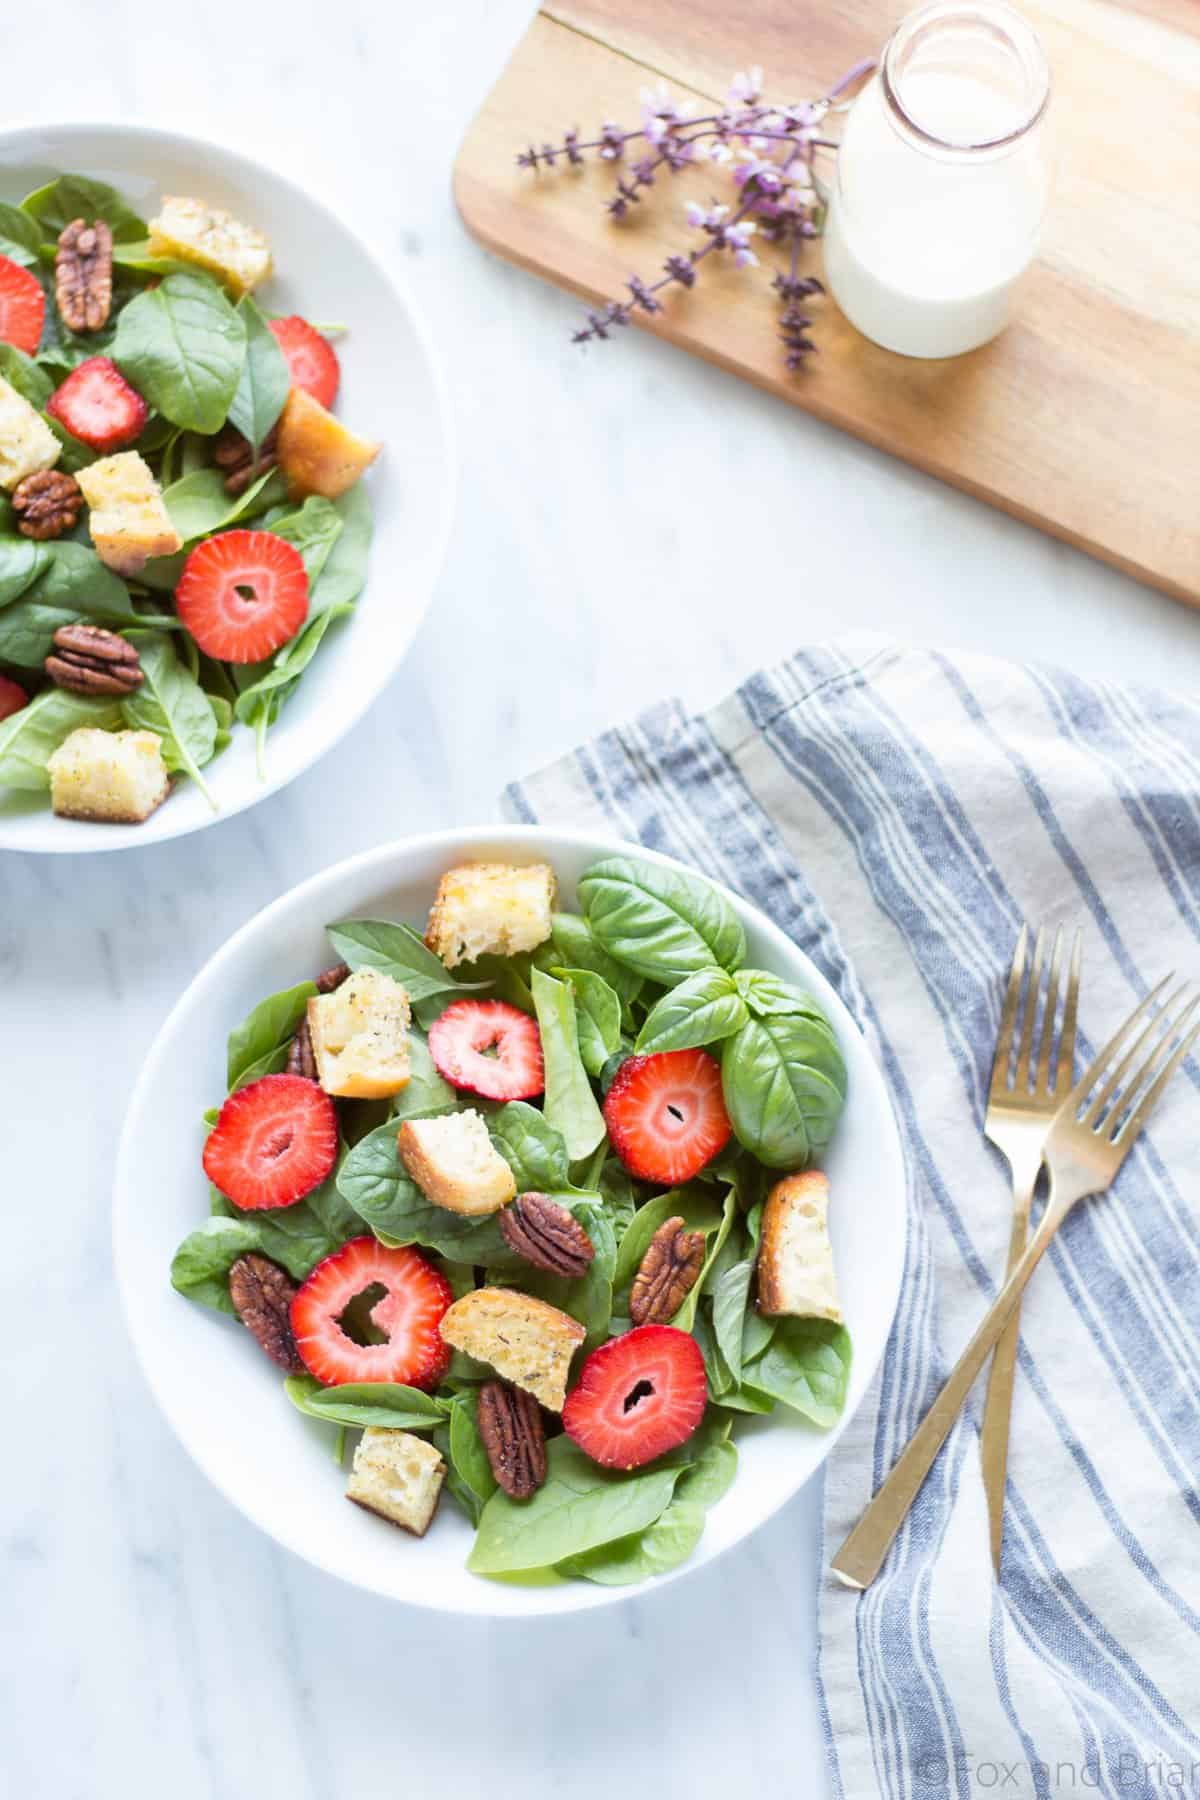 This Strawberry Basil Pecan Salad with Goat Cheese Dressing is a sweet and tangy summer salad bursting with fresh flavors and homemade croutons.